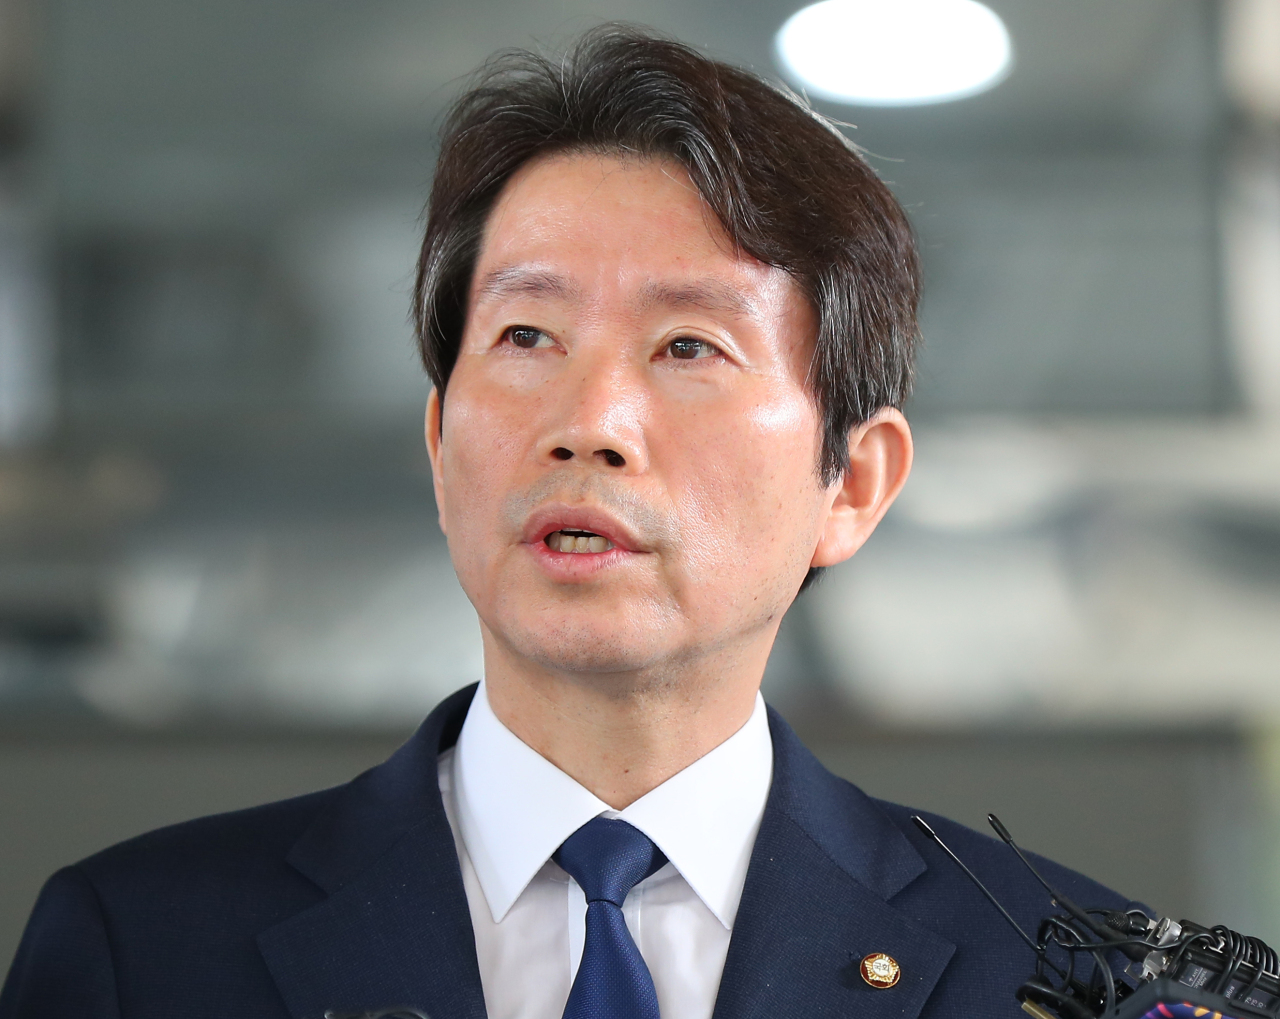 Unification Minister nominee Lee In-young speaks to the reporters on Tuesday in Seoul. (Yonhap)